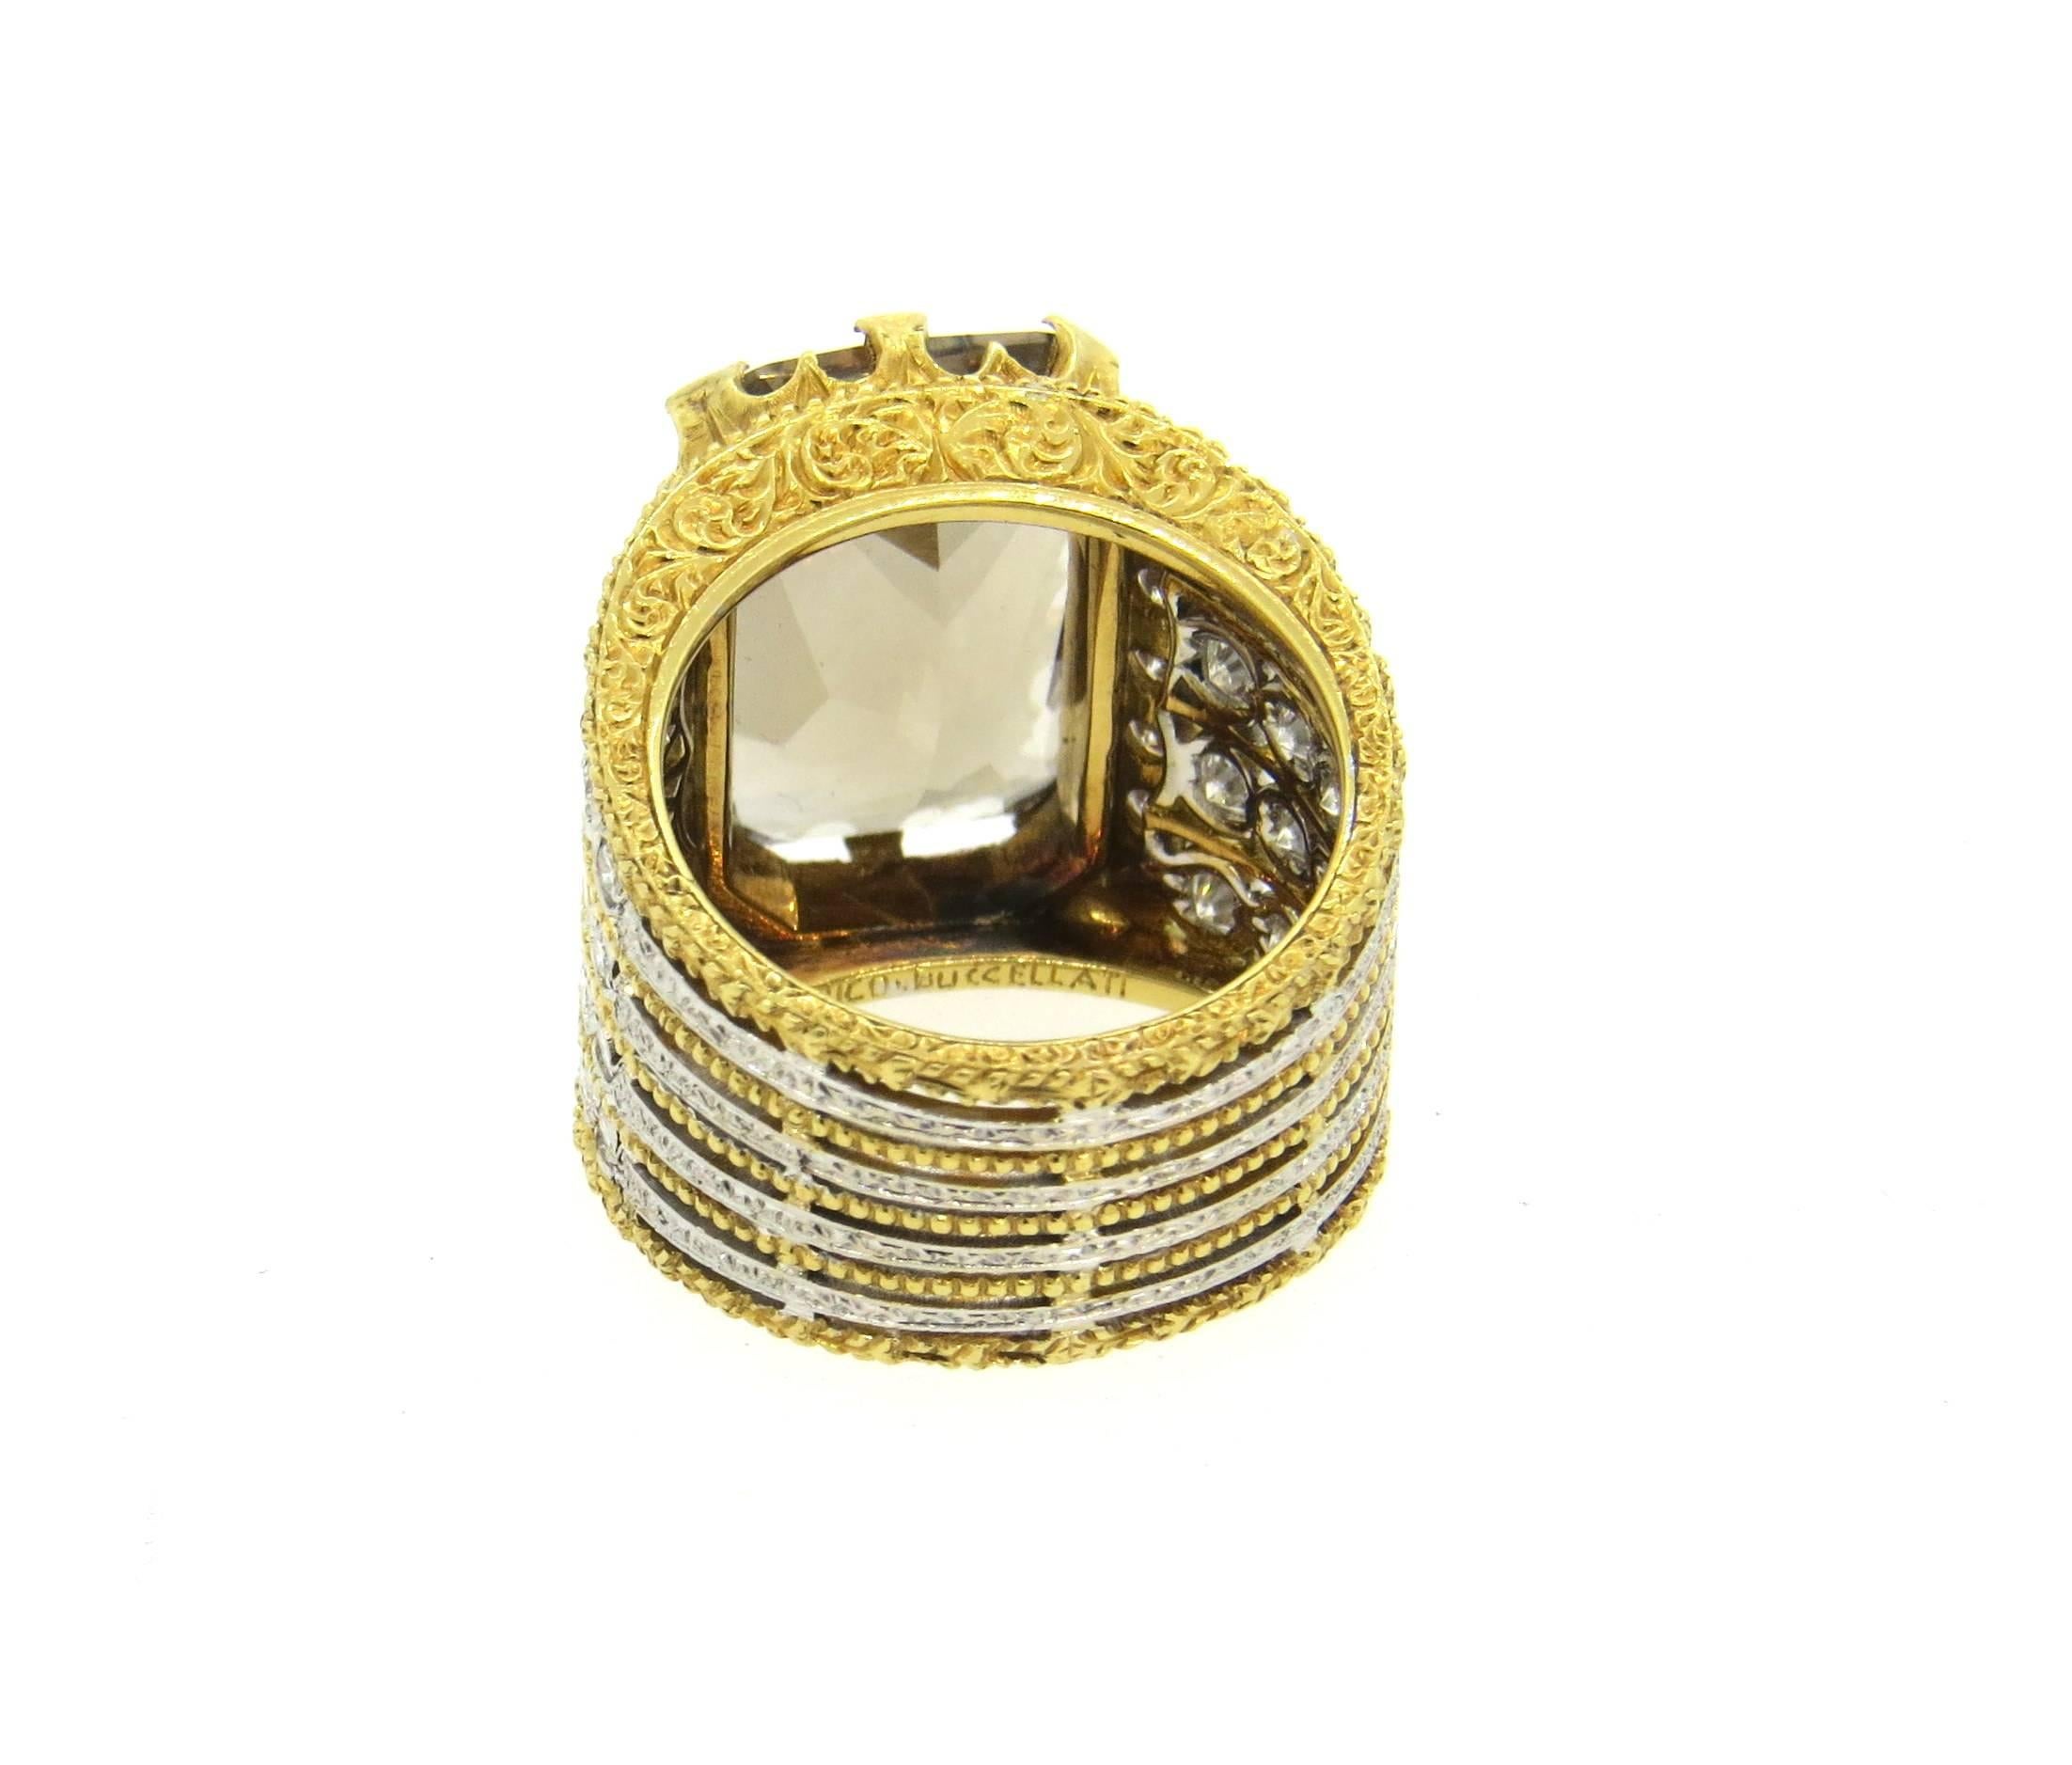 18k yellow and white gold impressive ring, crafted by Buccellati, decorated with an approx. 16ct smokey topaz as a centerpiece, surrounded with 1.46ctw in G/VS diamonds. Ring is a size 6 3/4, top of the ring is 18mm wide, featuring engraved sides.